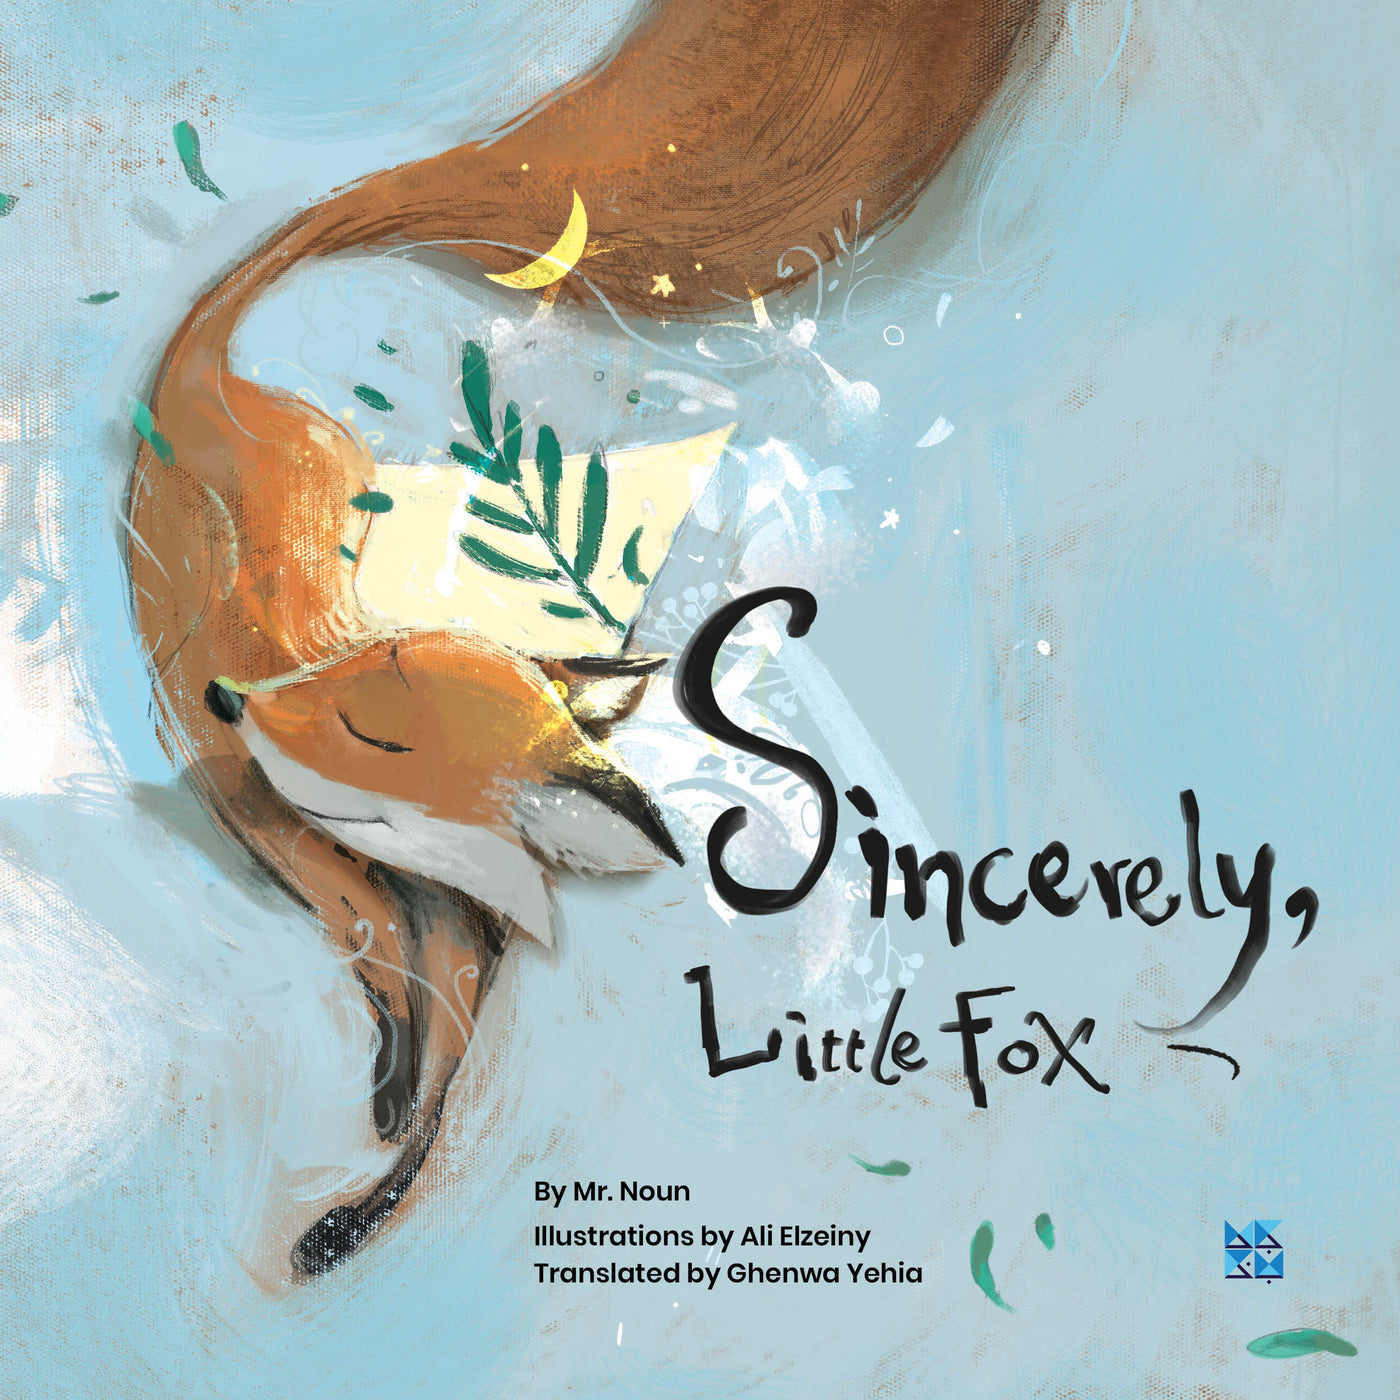 Sincerely, Little Fox Book Cover